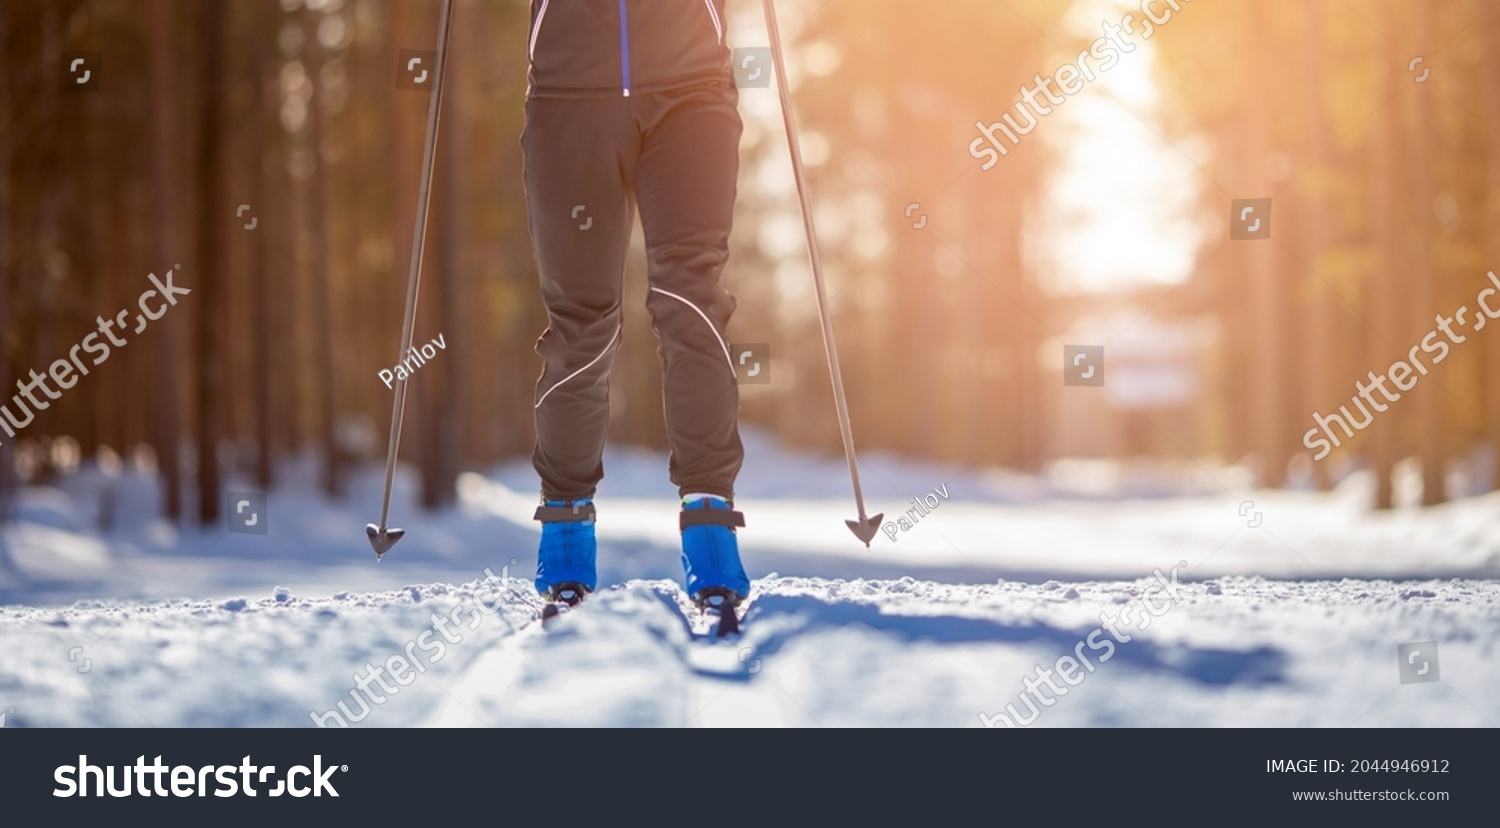 Cross country skiing Banner, winter sport on snowy track, sunset background. #2044946912